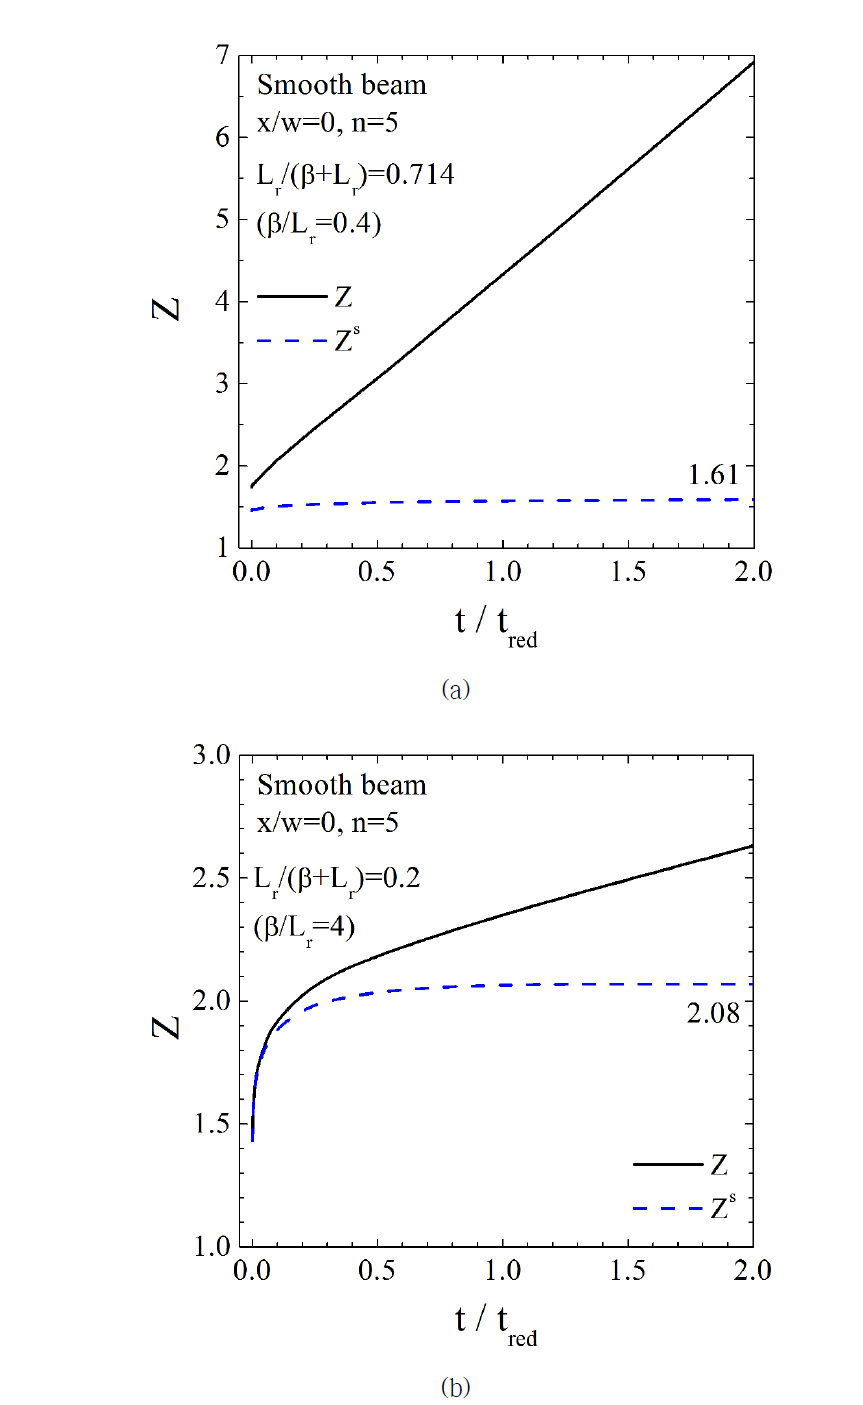 Variations of Z with normalized time: (a)-(b) smooth beam, and (c)-(d) notched beam